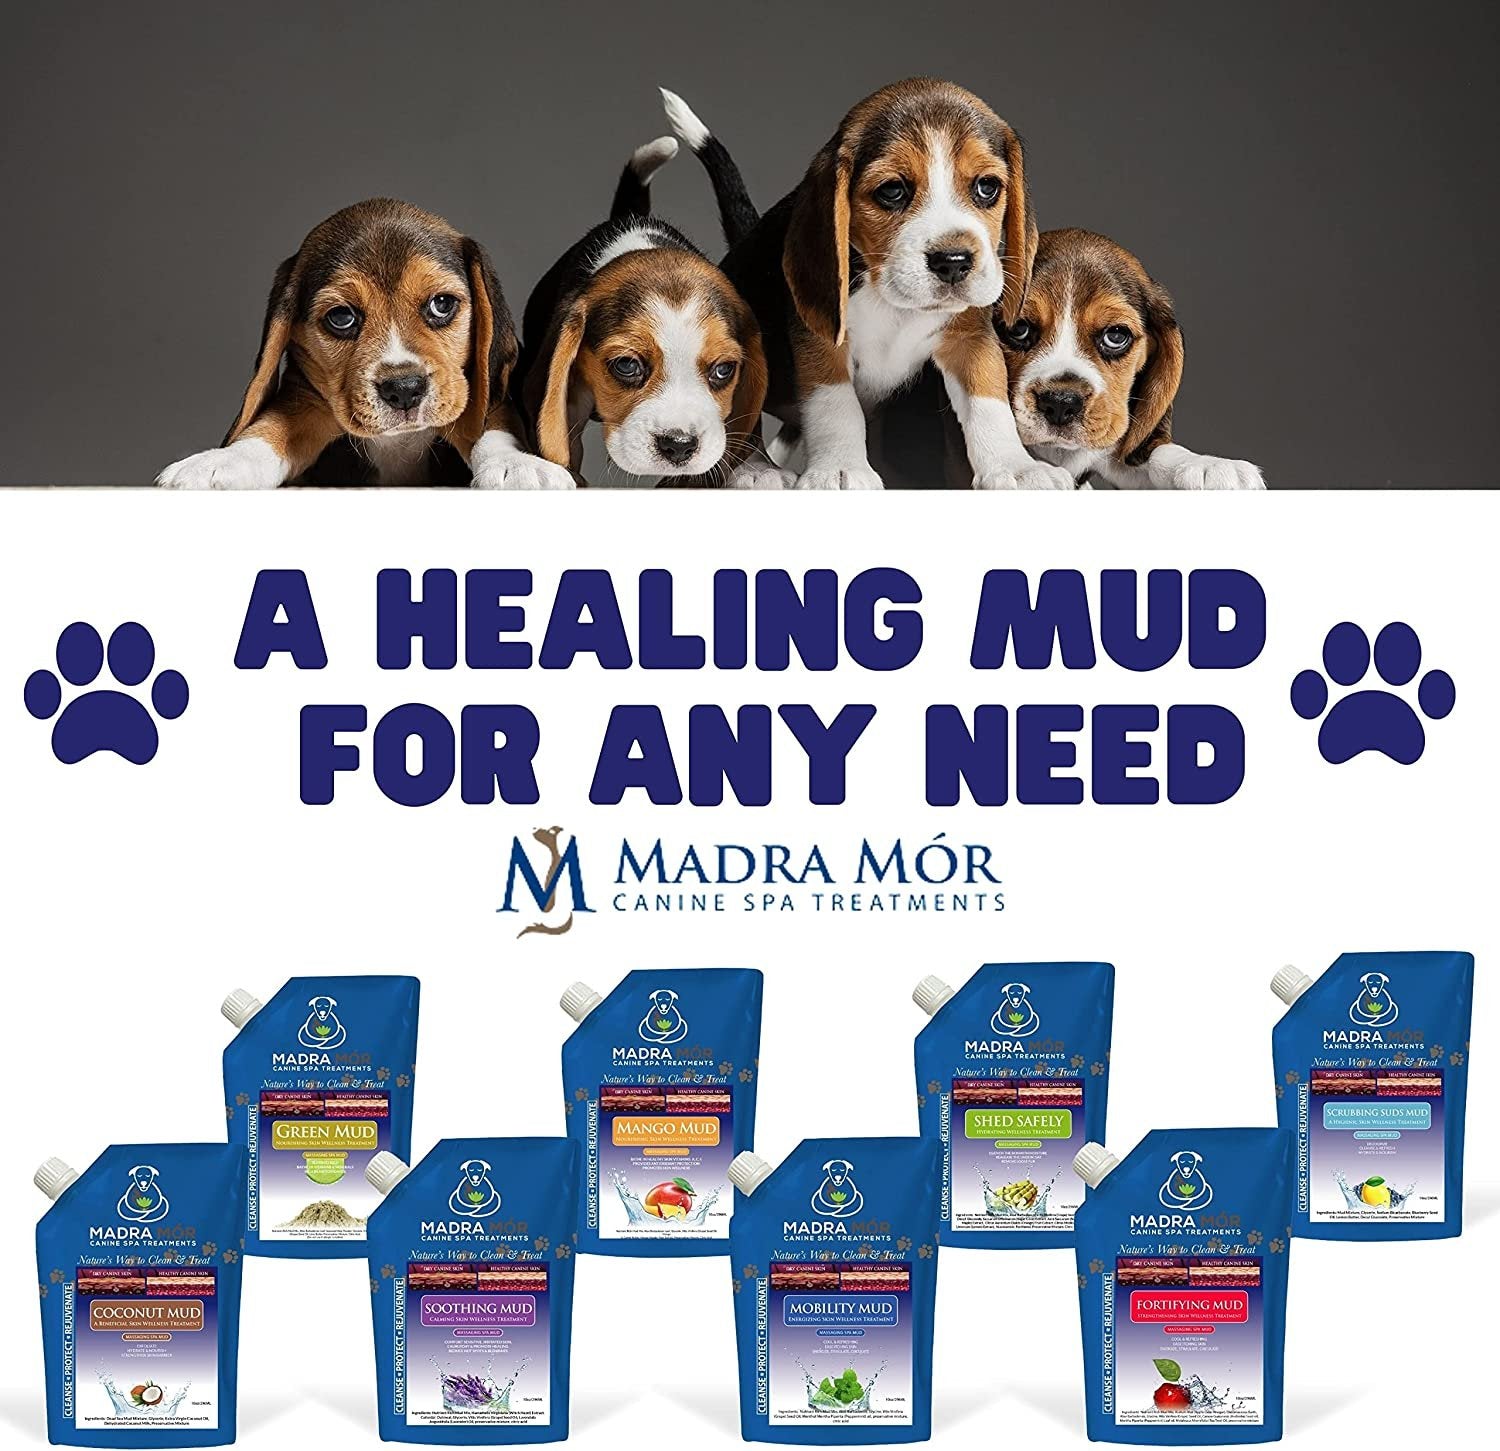 Madra Mor Massaging SPA Mud - Luxurious Dog Skin Wellness Treatment - Cleanse - Protect - Rejuvenate - Mobility Mud - 1 Pack (10oz) - with Multi-Purpose Key Chain